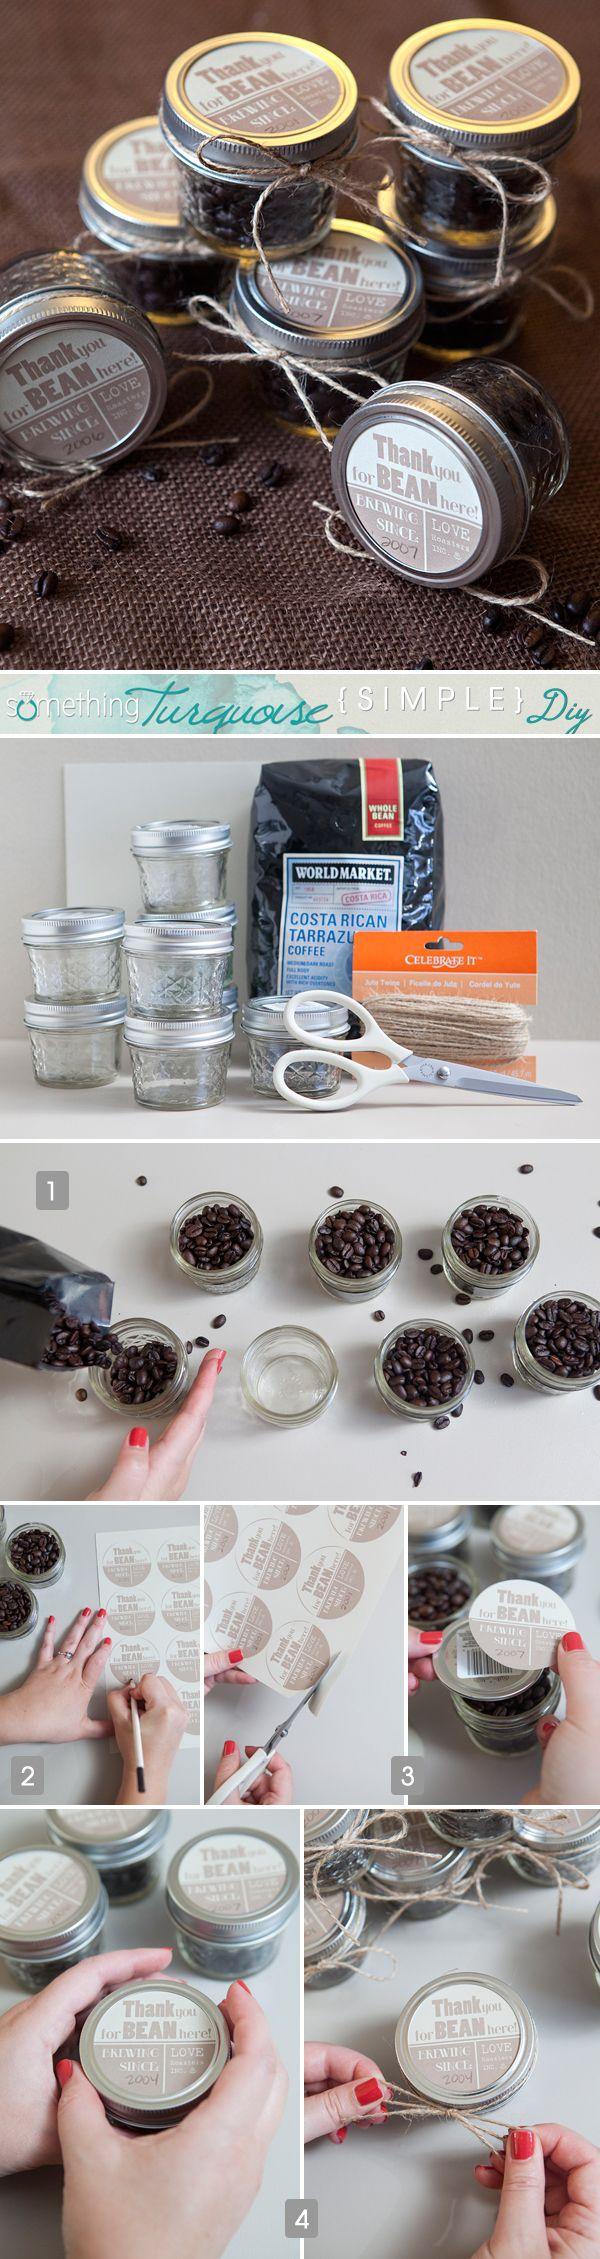 check-out-these-adorable-coffee-bean-wedding-favors-in-mason-jars.jpg